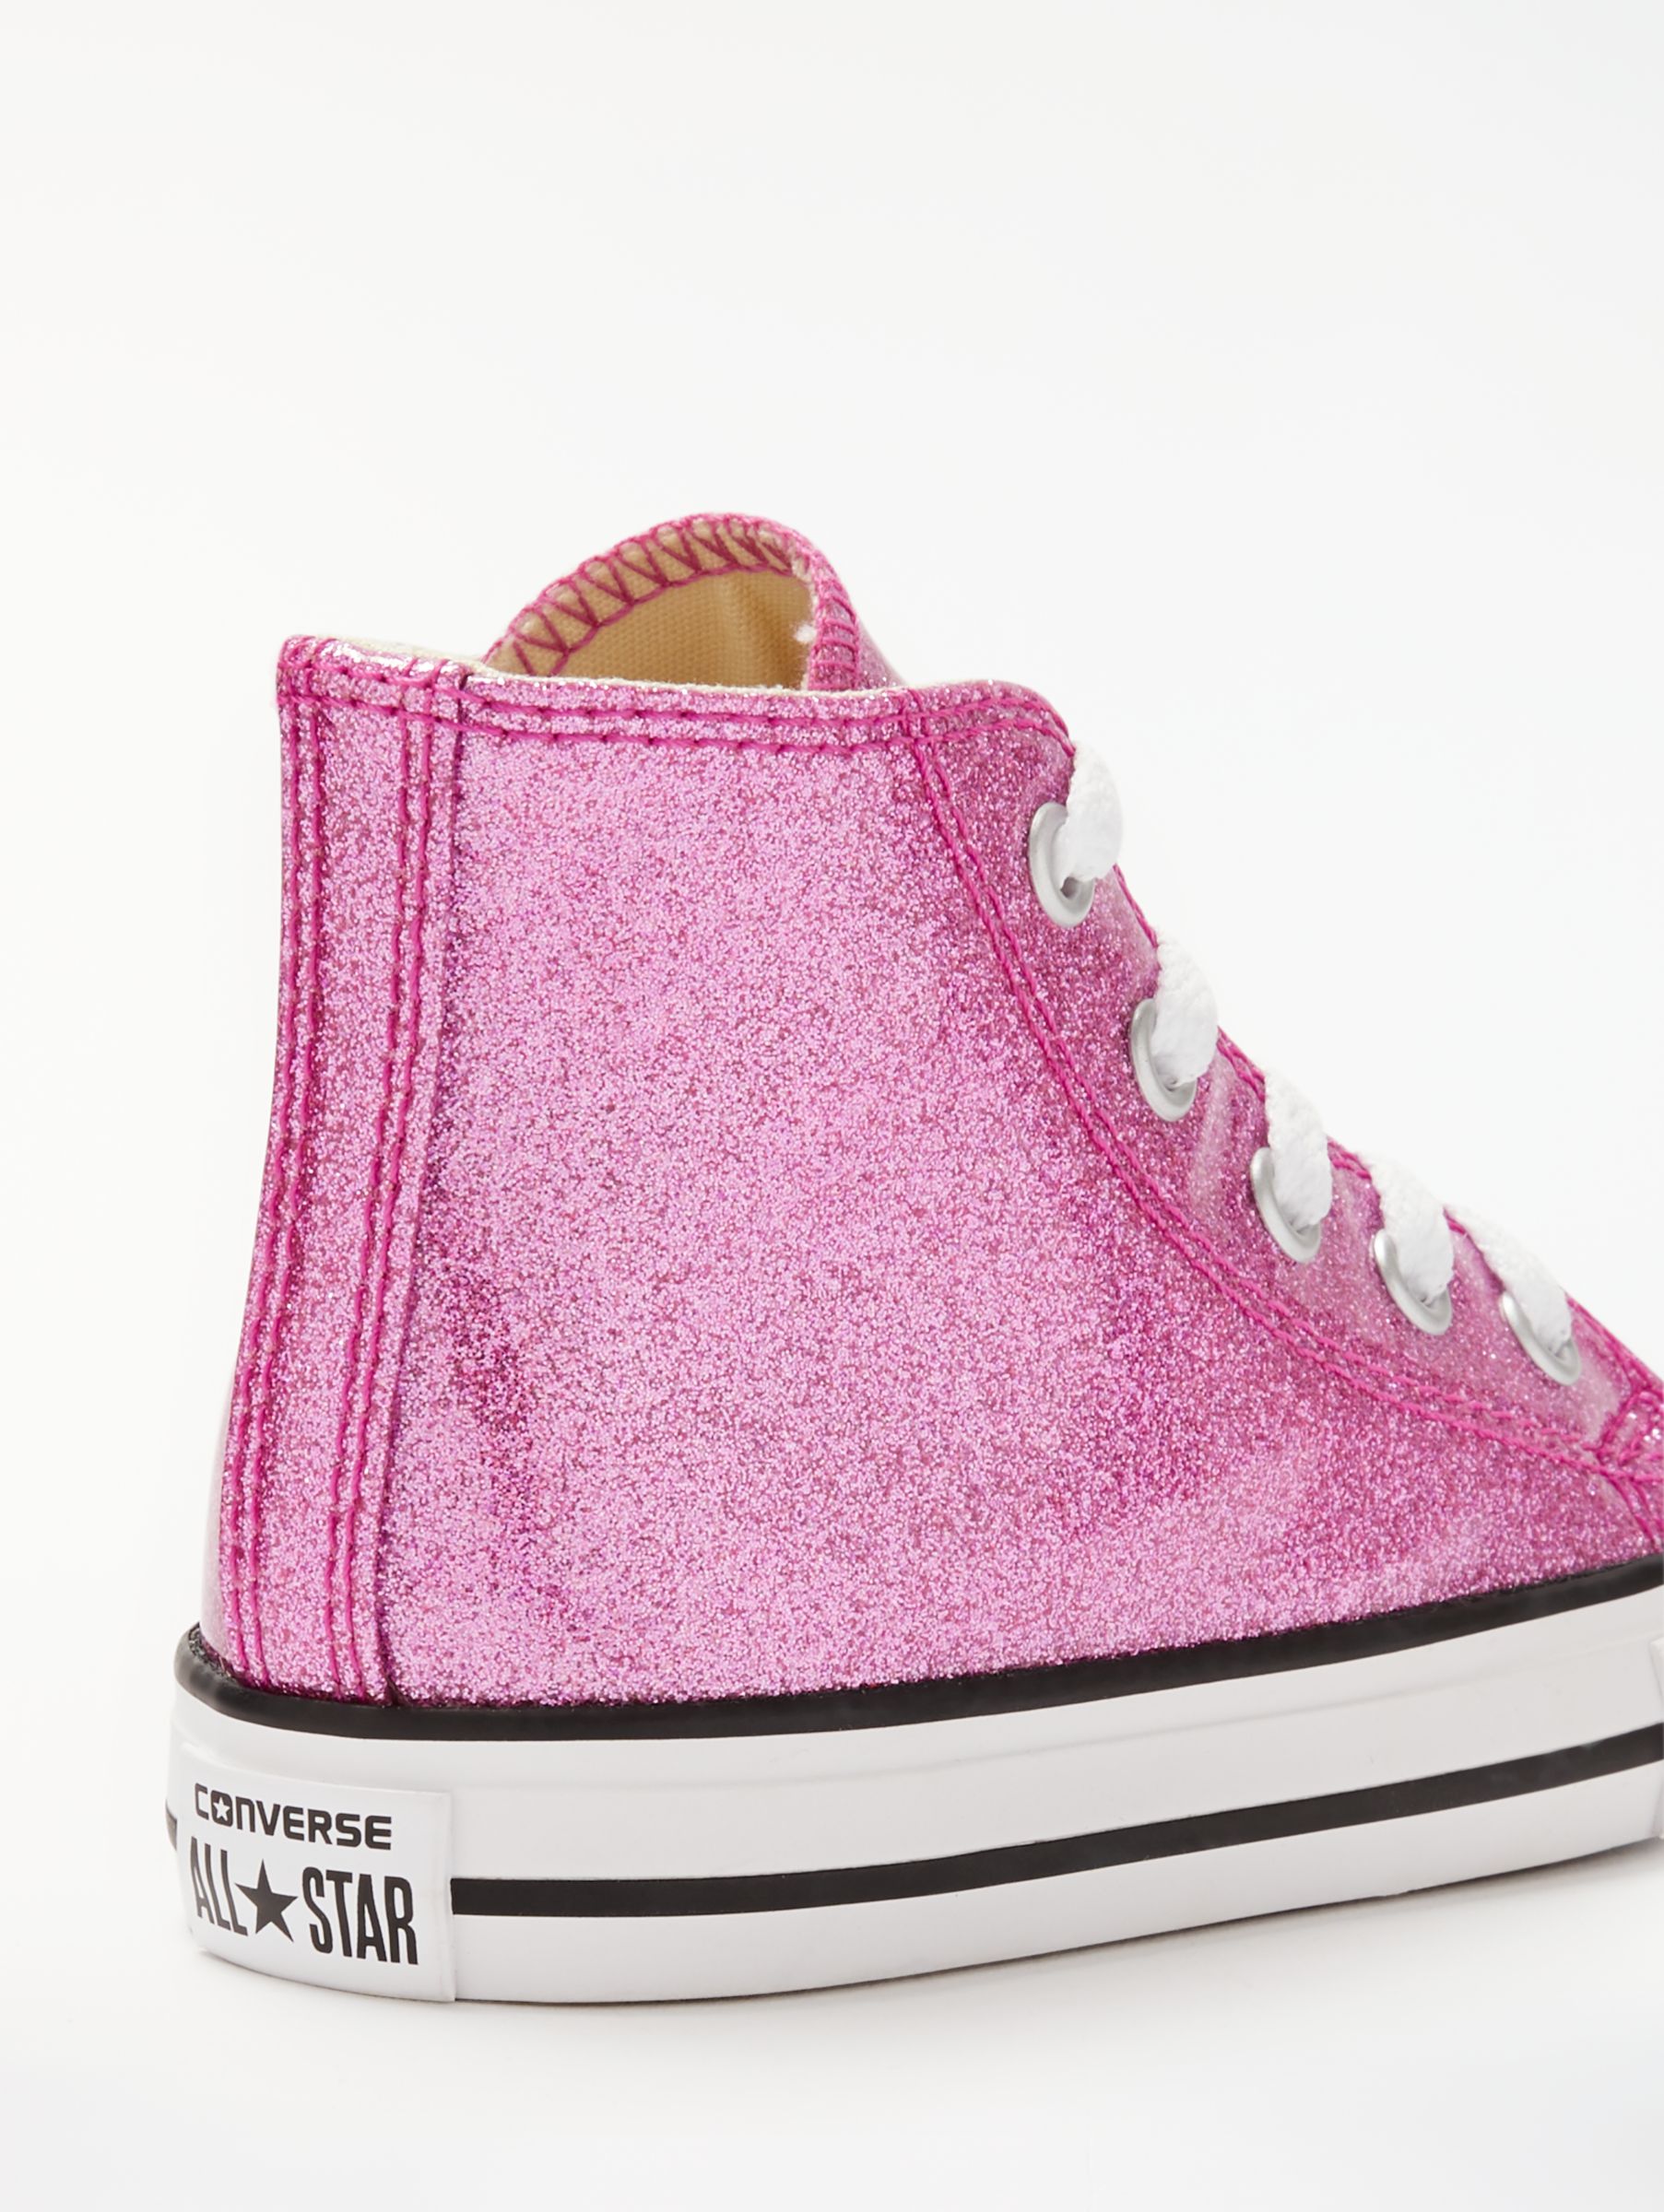 pink converse with glitter